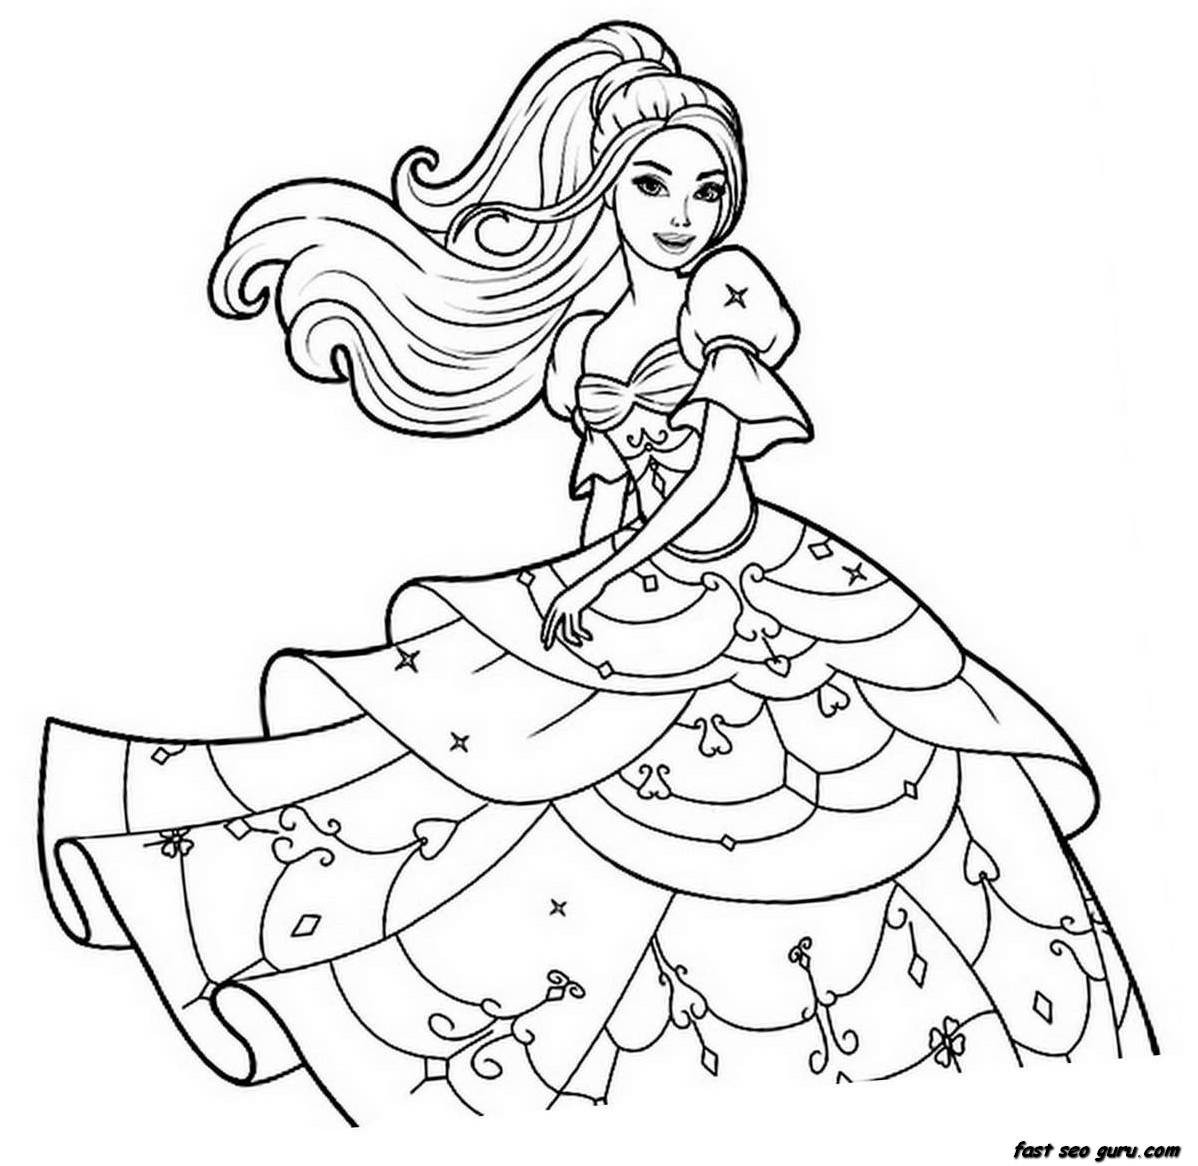 Coloring Pages Disney For Girls
 Coloring Pages Disney Princess Coloring Pages